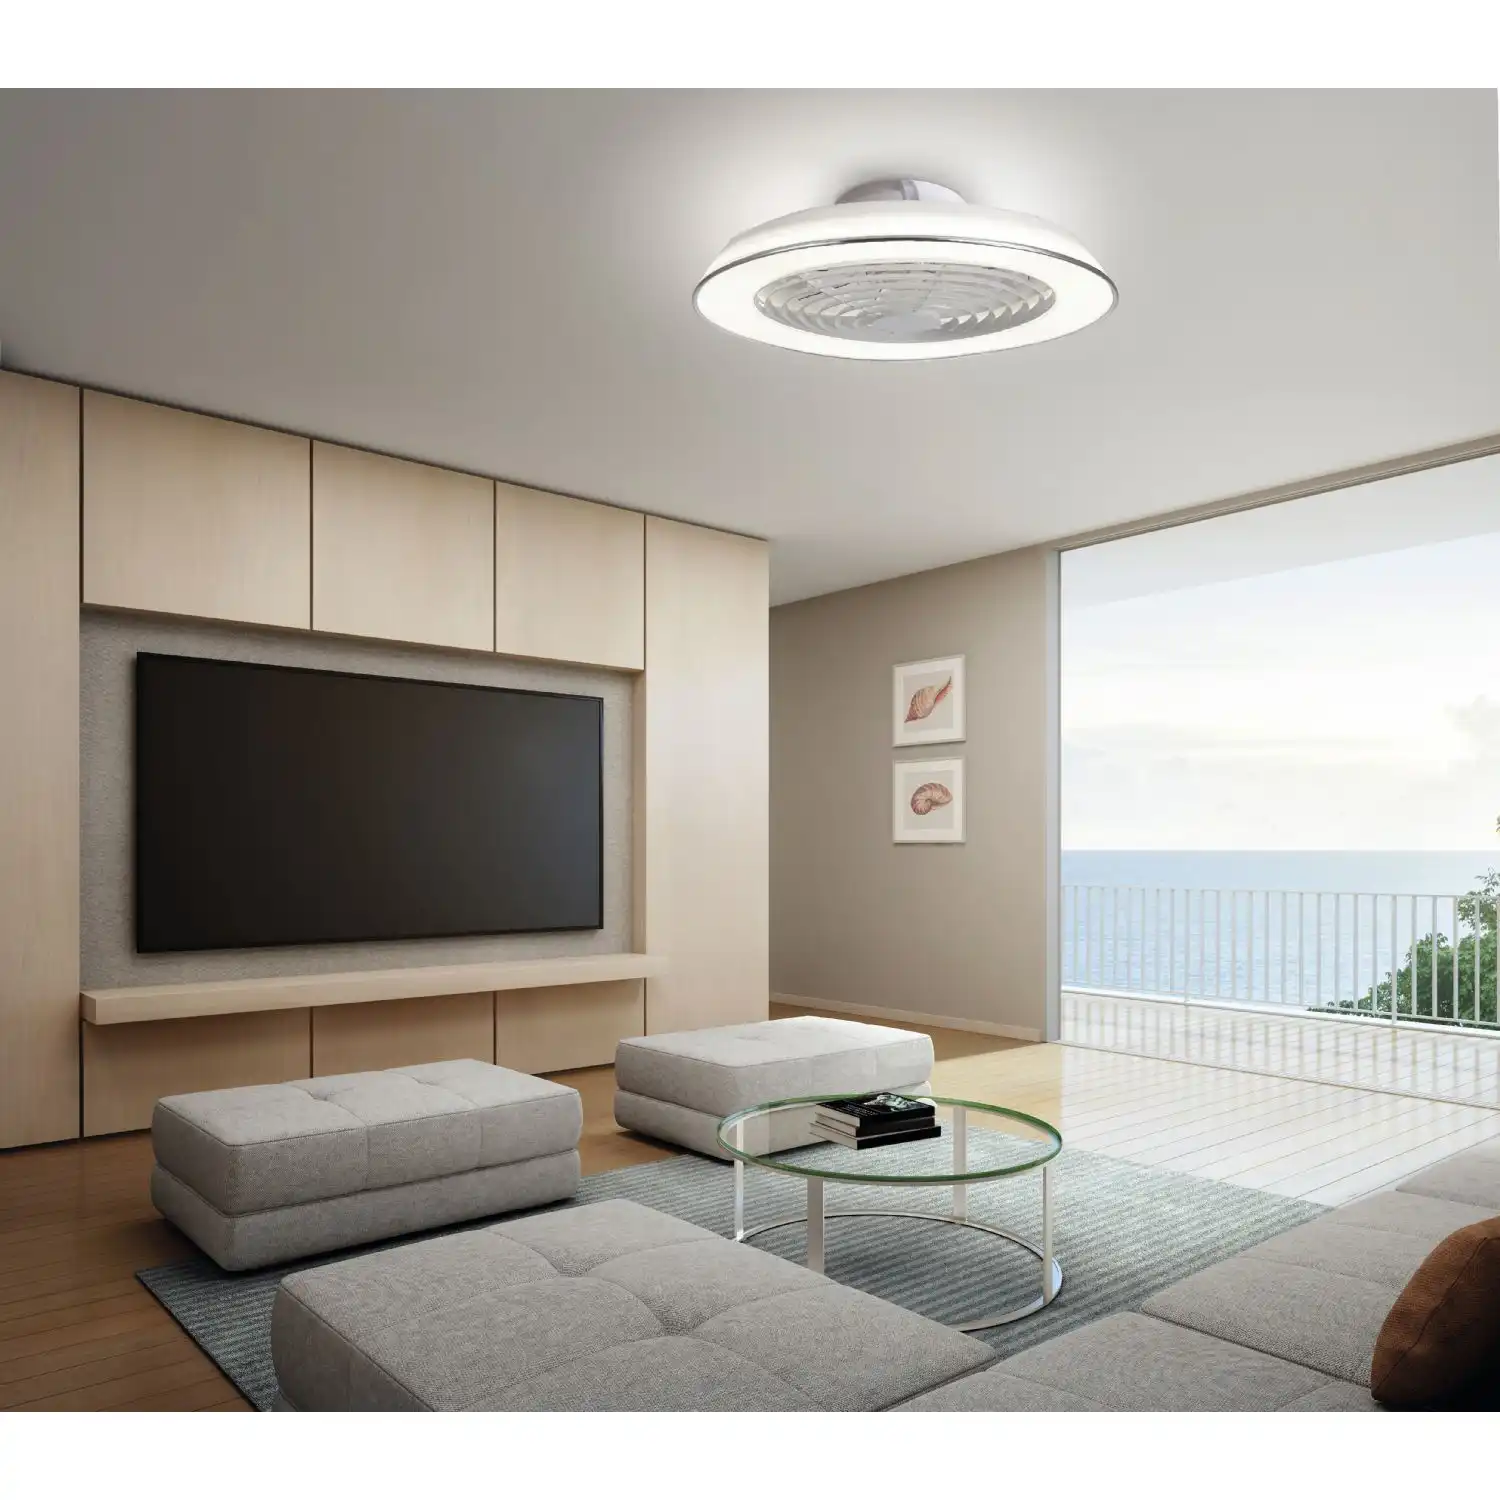 Dimmable Ceiling Light With Built Reversible Fan and Remote Control White Finish